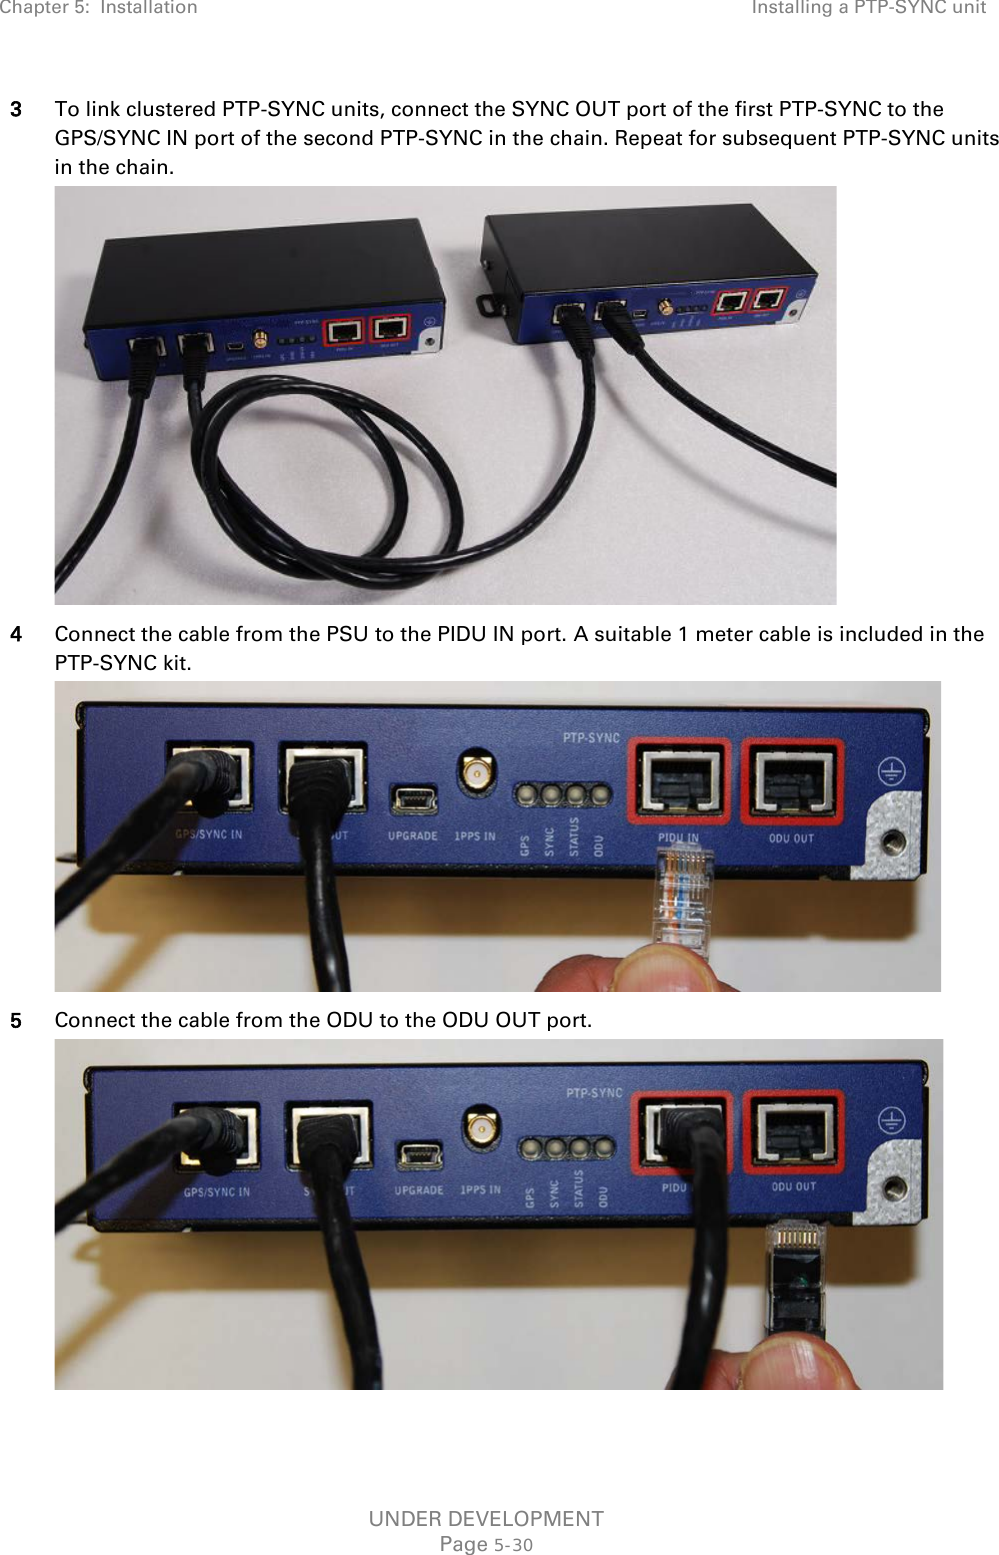 Chapter 5:  Installation Installing a PTP-SYNC unit  3 To link clustered PTP-SYNC units, connect the SYNC OUT port of the first PTP-SYNC to the GPS/SYNC IN port of the second PTP-SYNC in the chain. Repeat for subsequent PTP-SYNC units in the chain.  4 Connect the cable from the PSU to the PIDU IN port. A suitable 1 meter cable is included in the PTP-SYNC kit.  5 Connect the cable from the ODU to the ODU OUT port.  UNDER DEVELOPMENT Page 5-30 